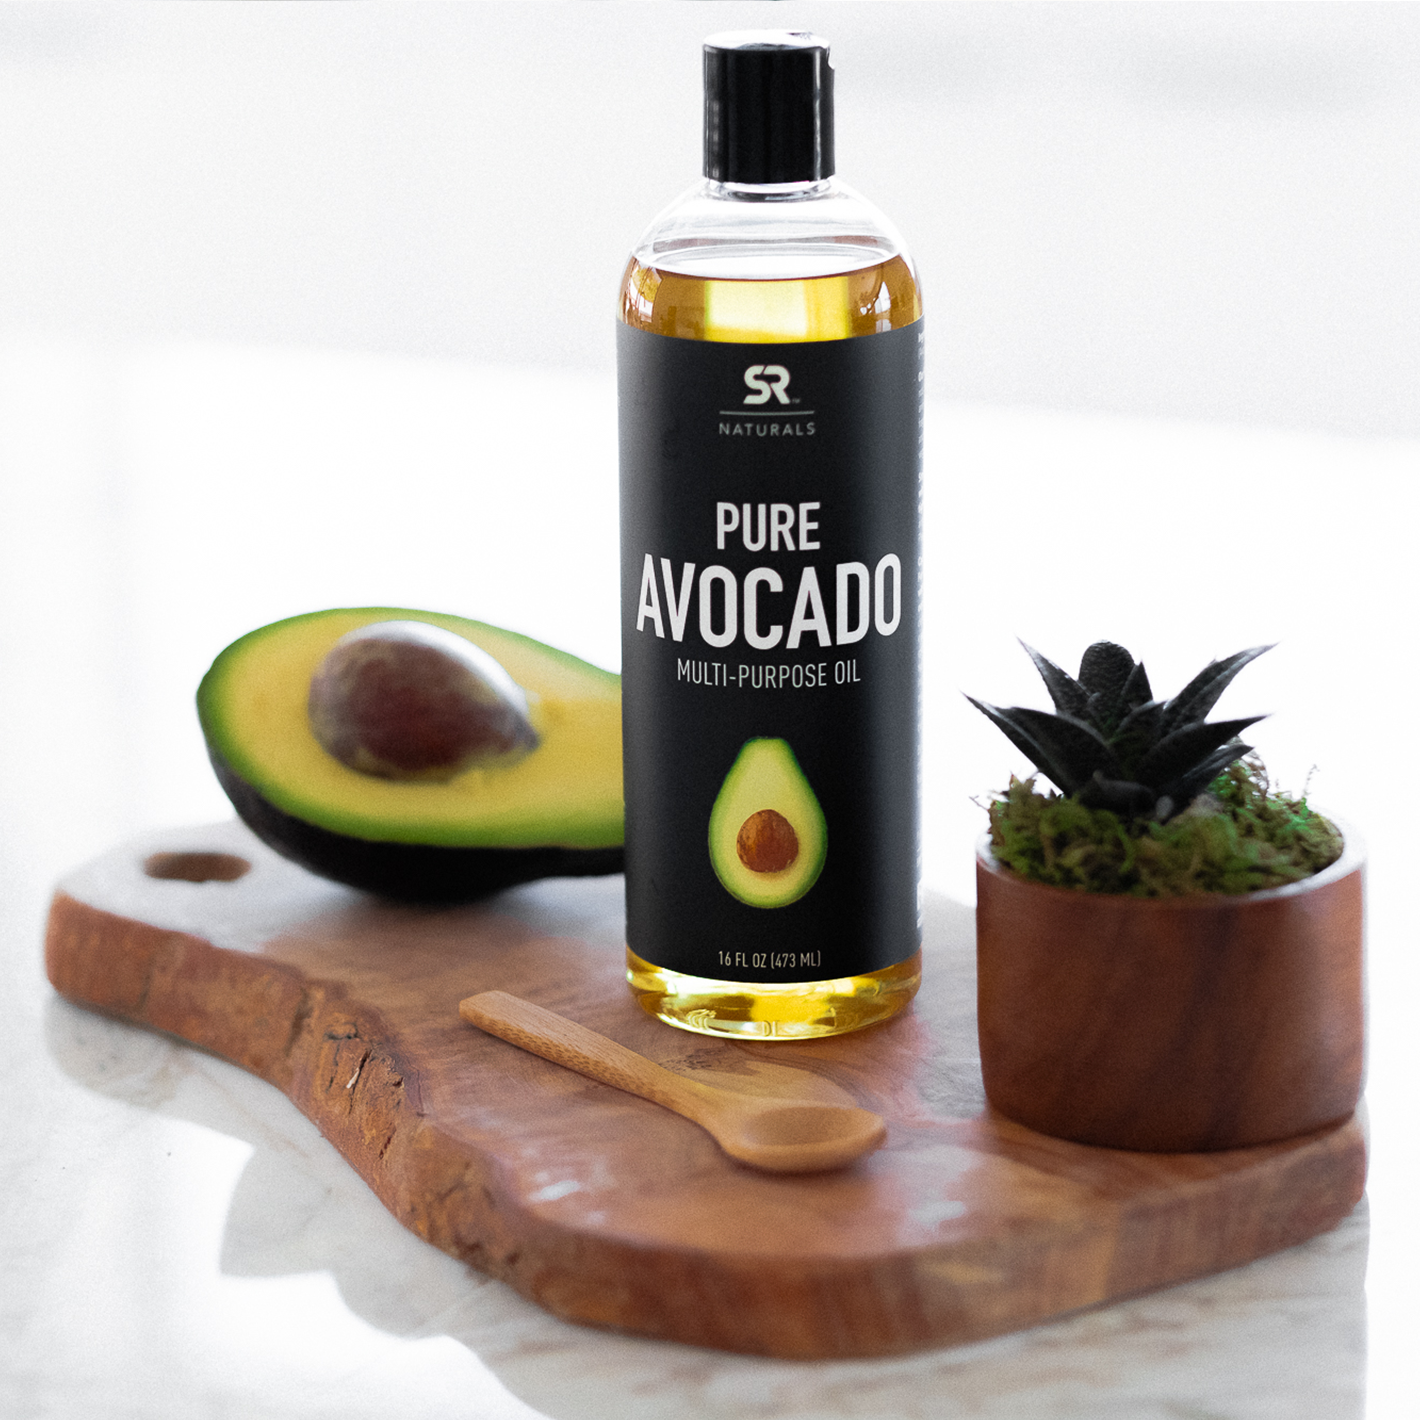 A bottle of Sports Research Naturals Pure Avocado Oil sitting next to a half sliced avocado and a small plant on a wooden board.